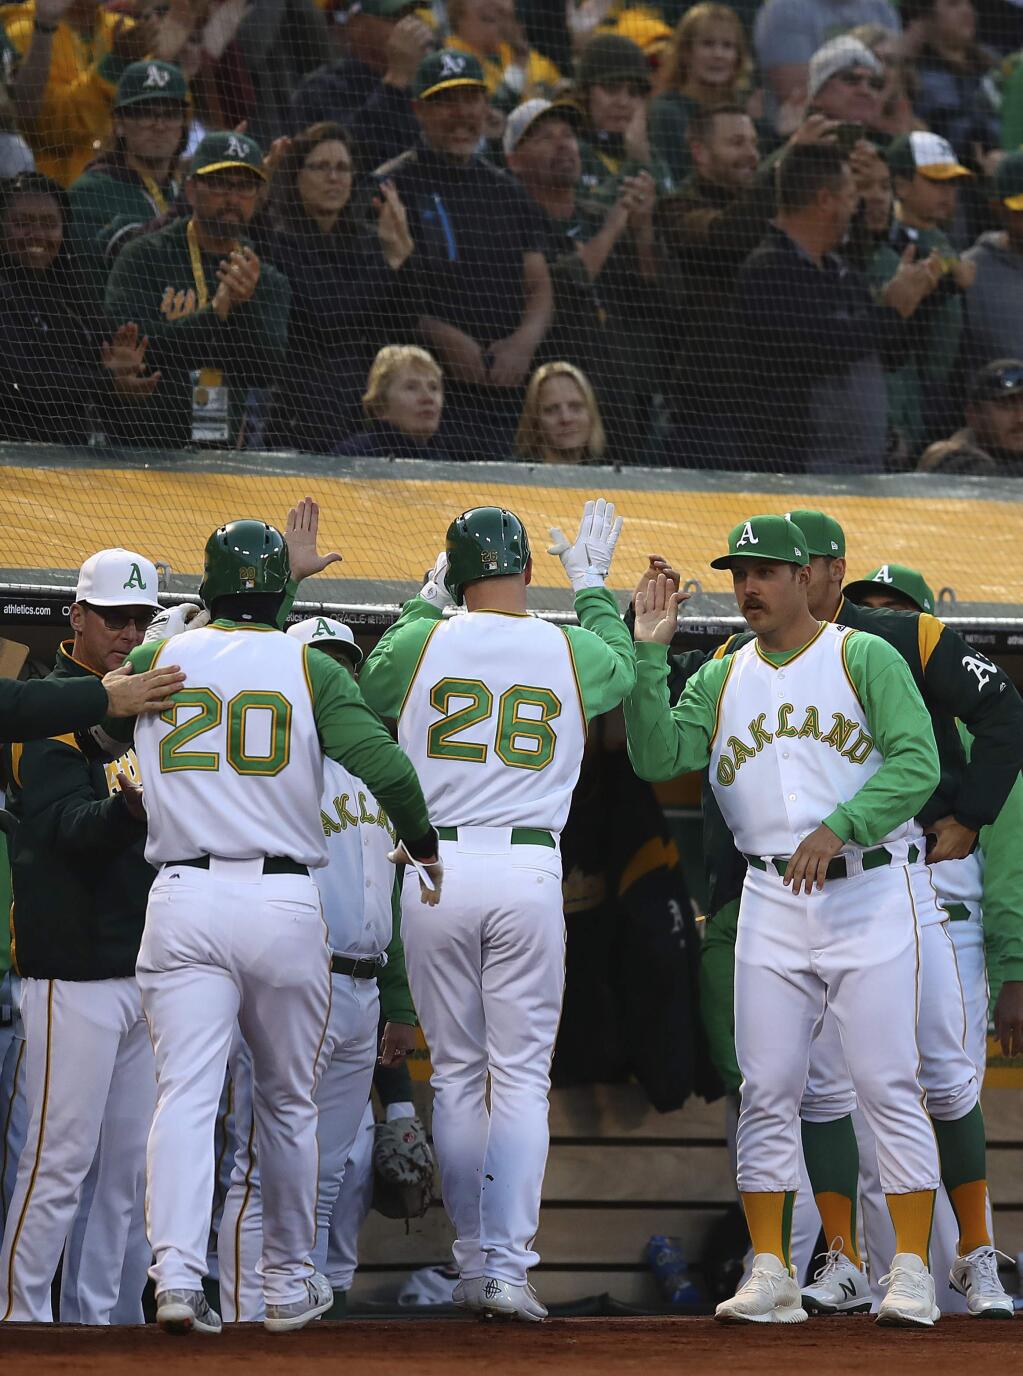 The Oakland Athletics' Mark Canha (20) and Matt Chapman (26) are congratulated by manager Bob Melvin, left, and Daniel Mengden, right, after scoring against the Chicago White Sox during the first inning Tuesday, April 17, 2018, in Oakland. (AP Photo/Ben Margot)